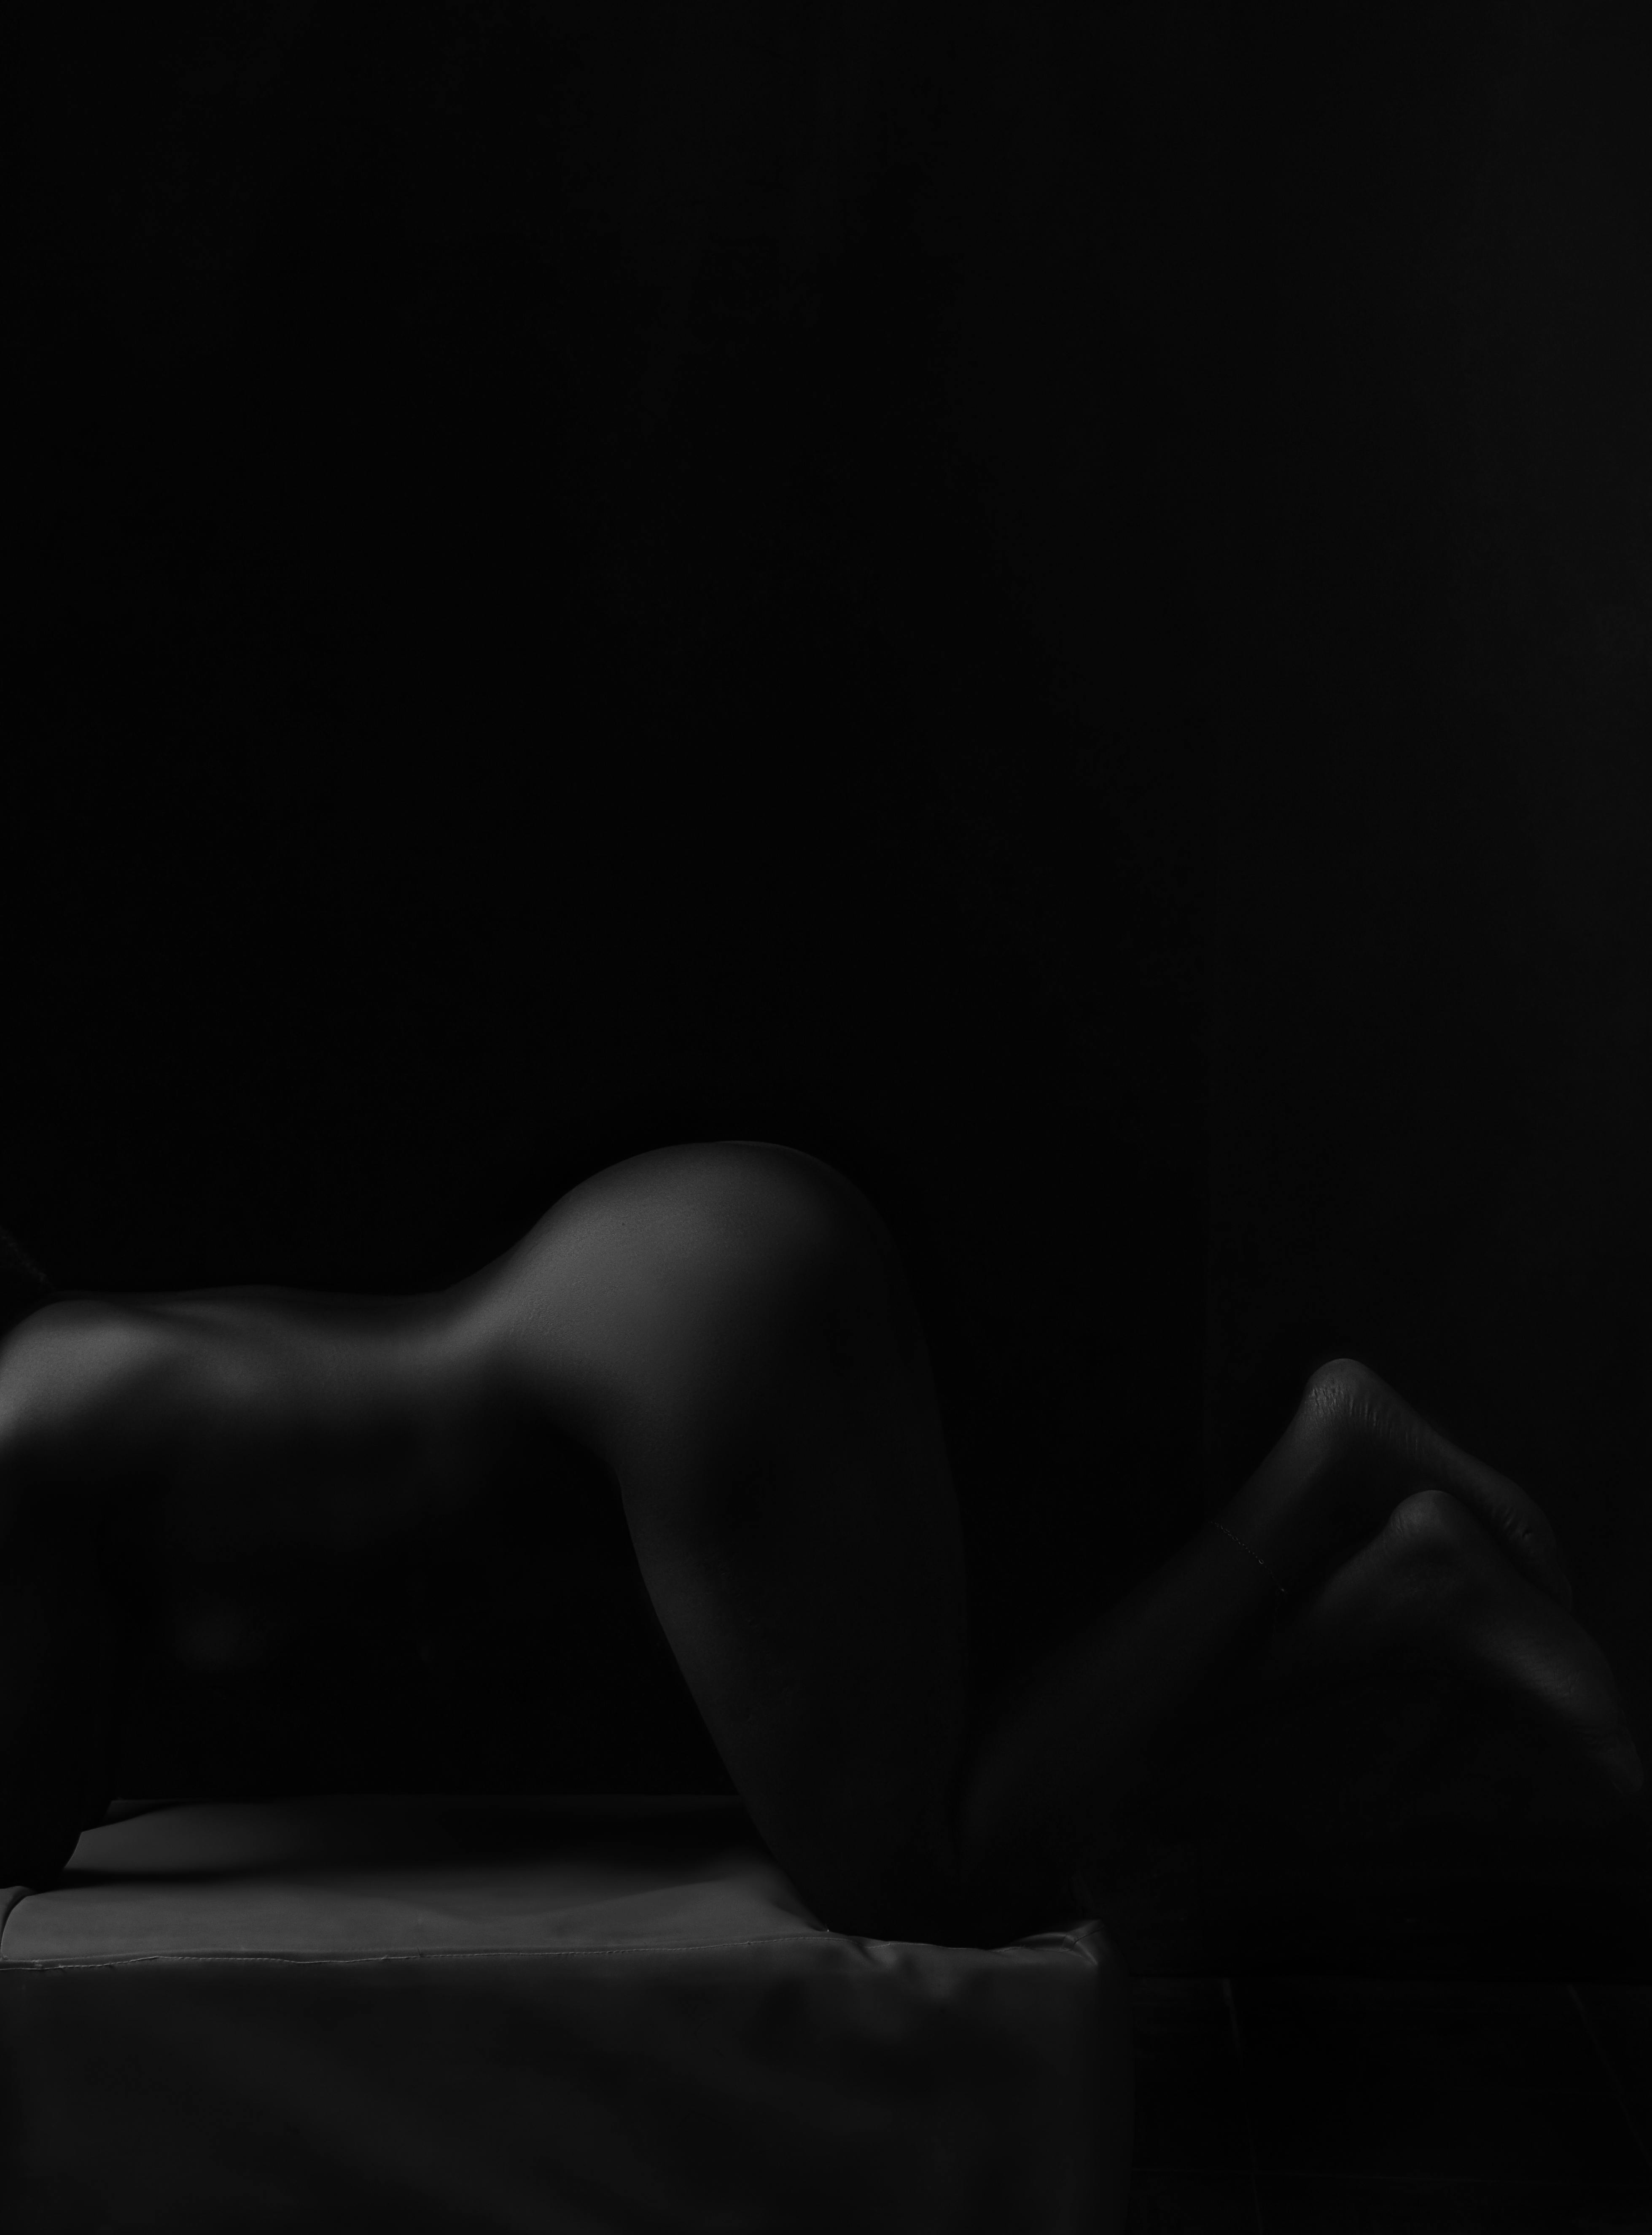 Naked woman in dark room · Free Stock Photo photo